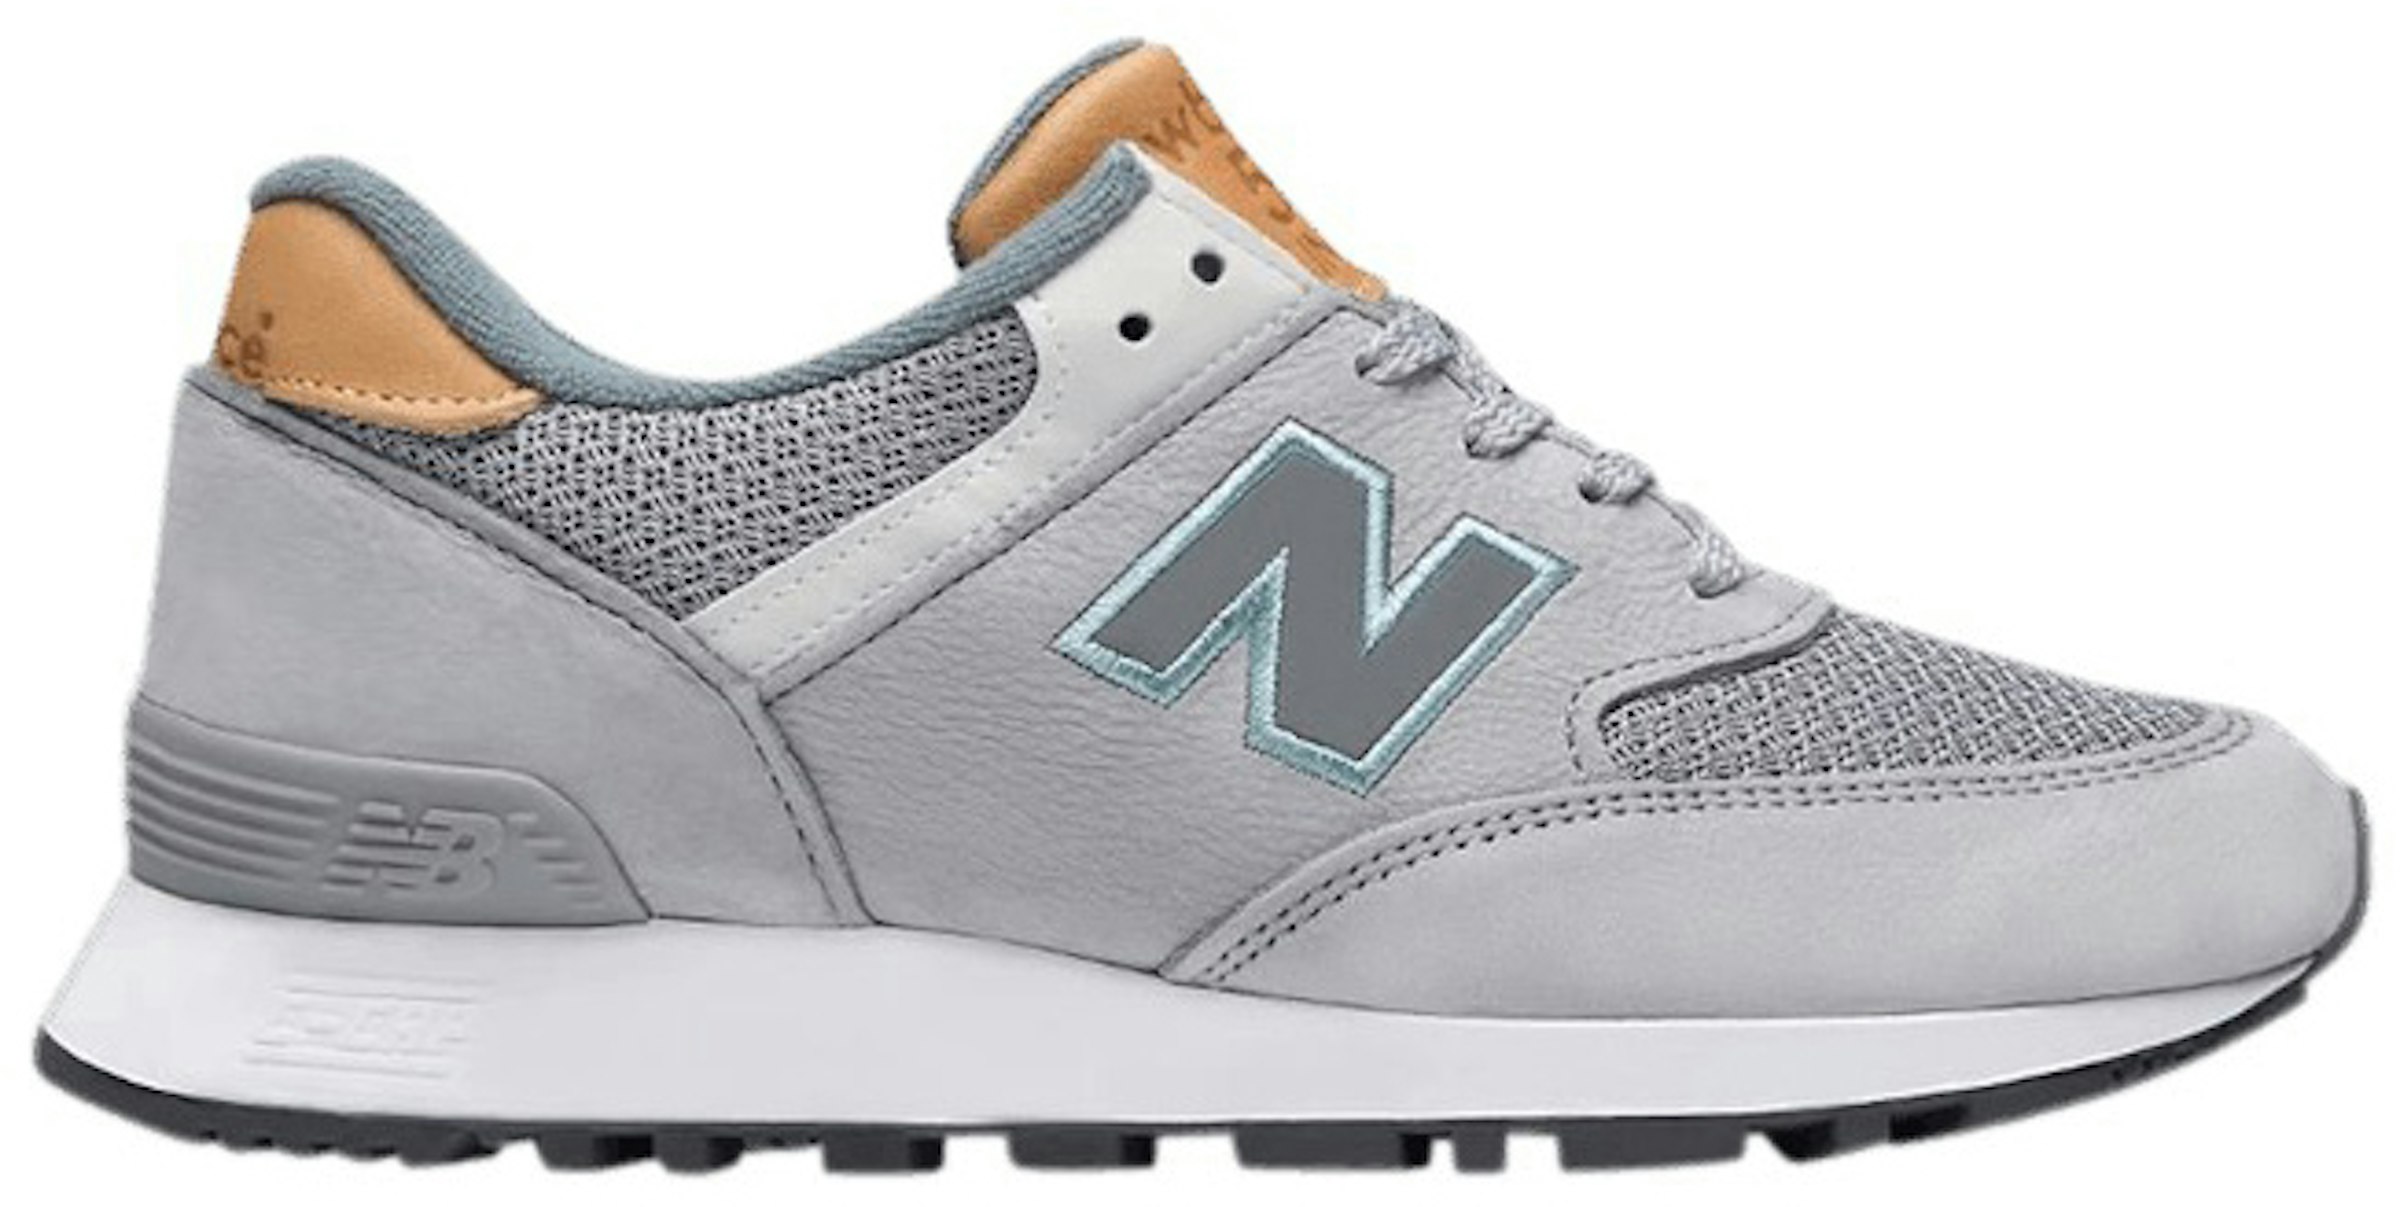 New Balance 576 Made in England Mid (Women's) - W576NBG